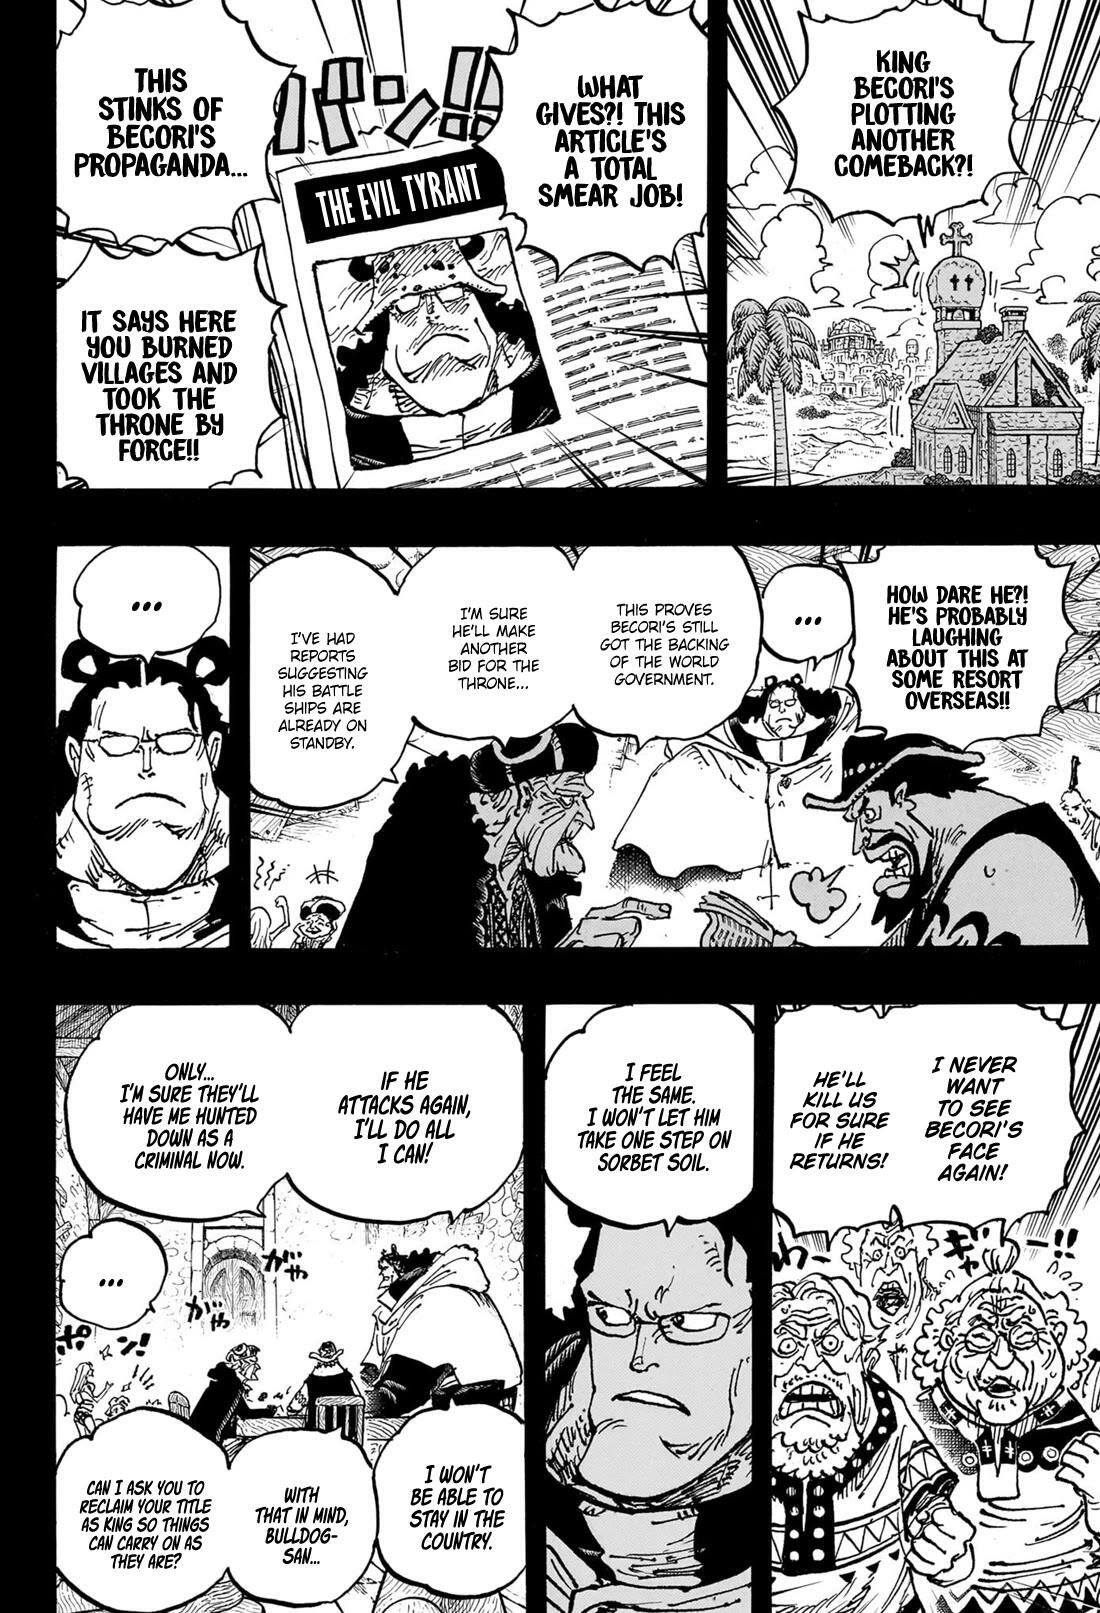 One Piece Chapter 1070 initial spoilers: Vegapunk explains how to replicate  Devil Fruits